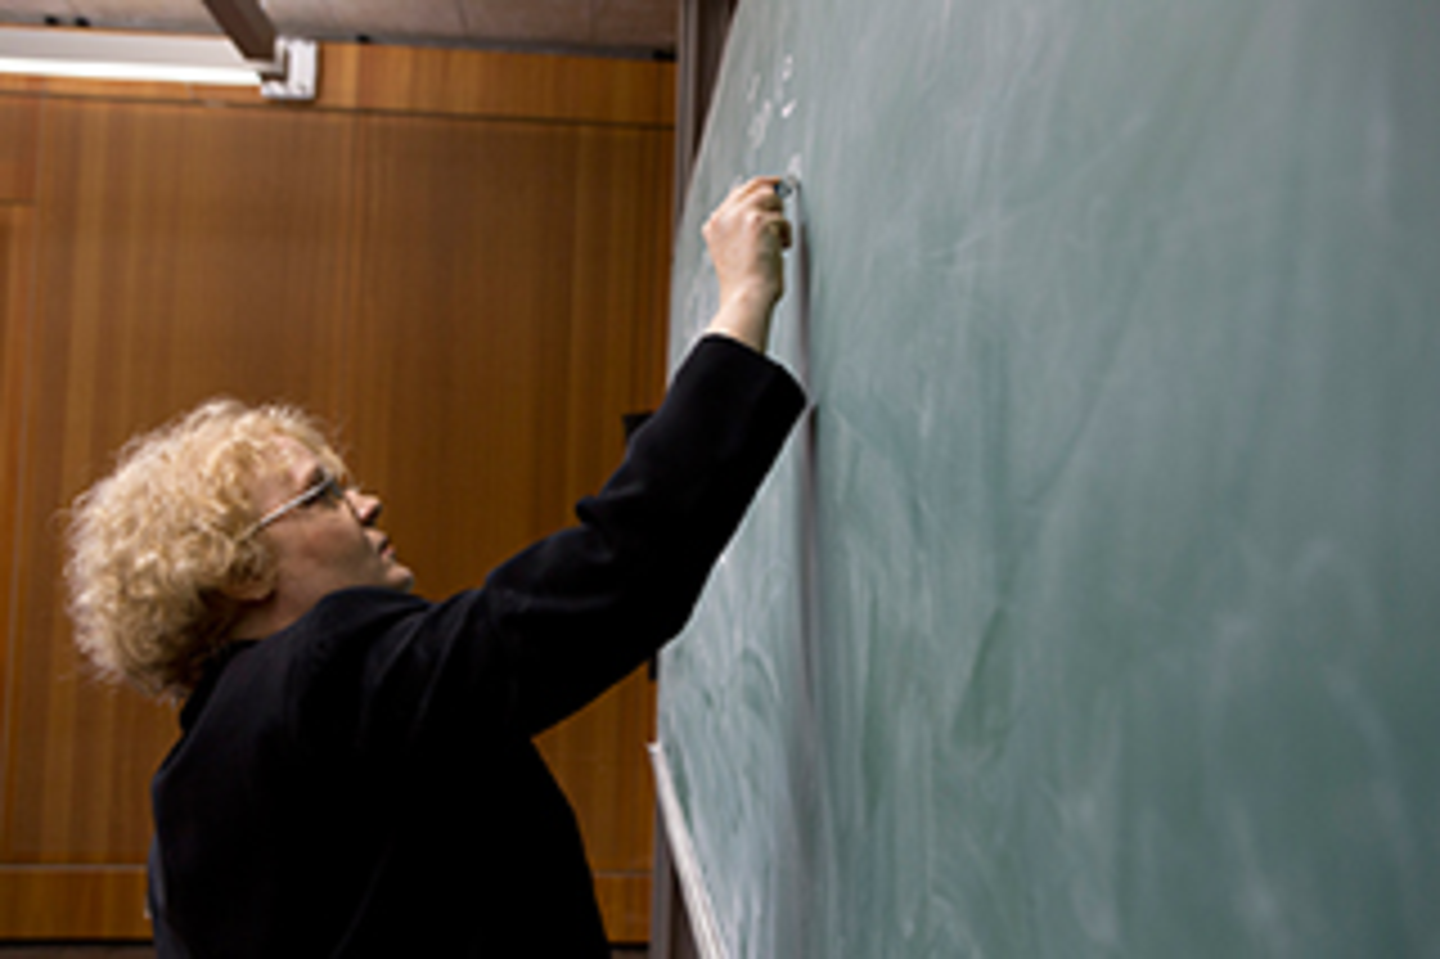 A woman is wiriting on a chalk board.